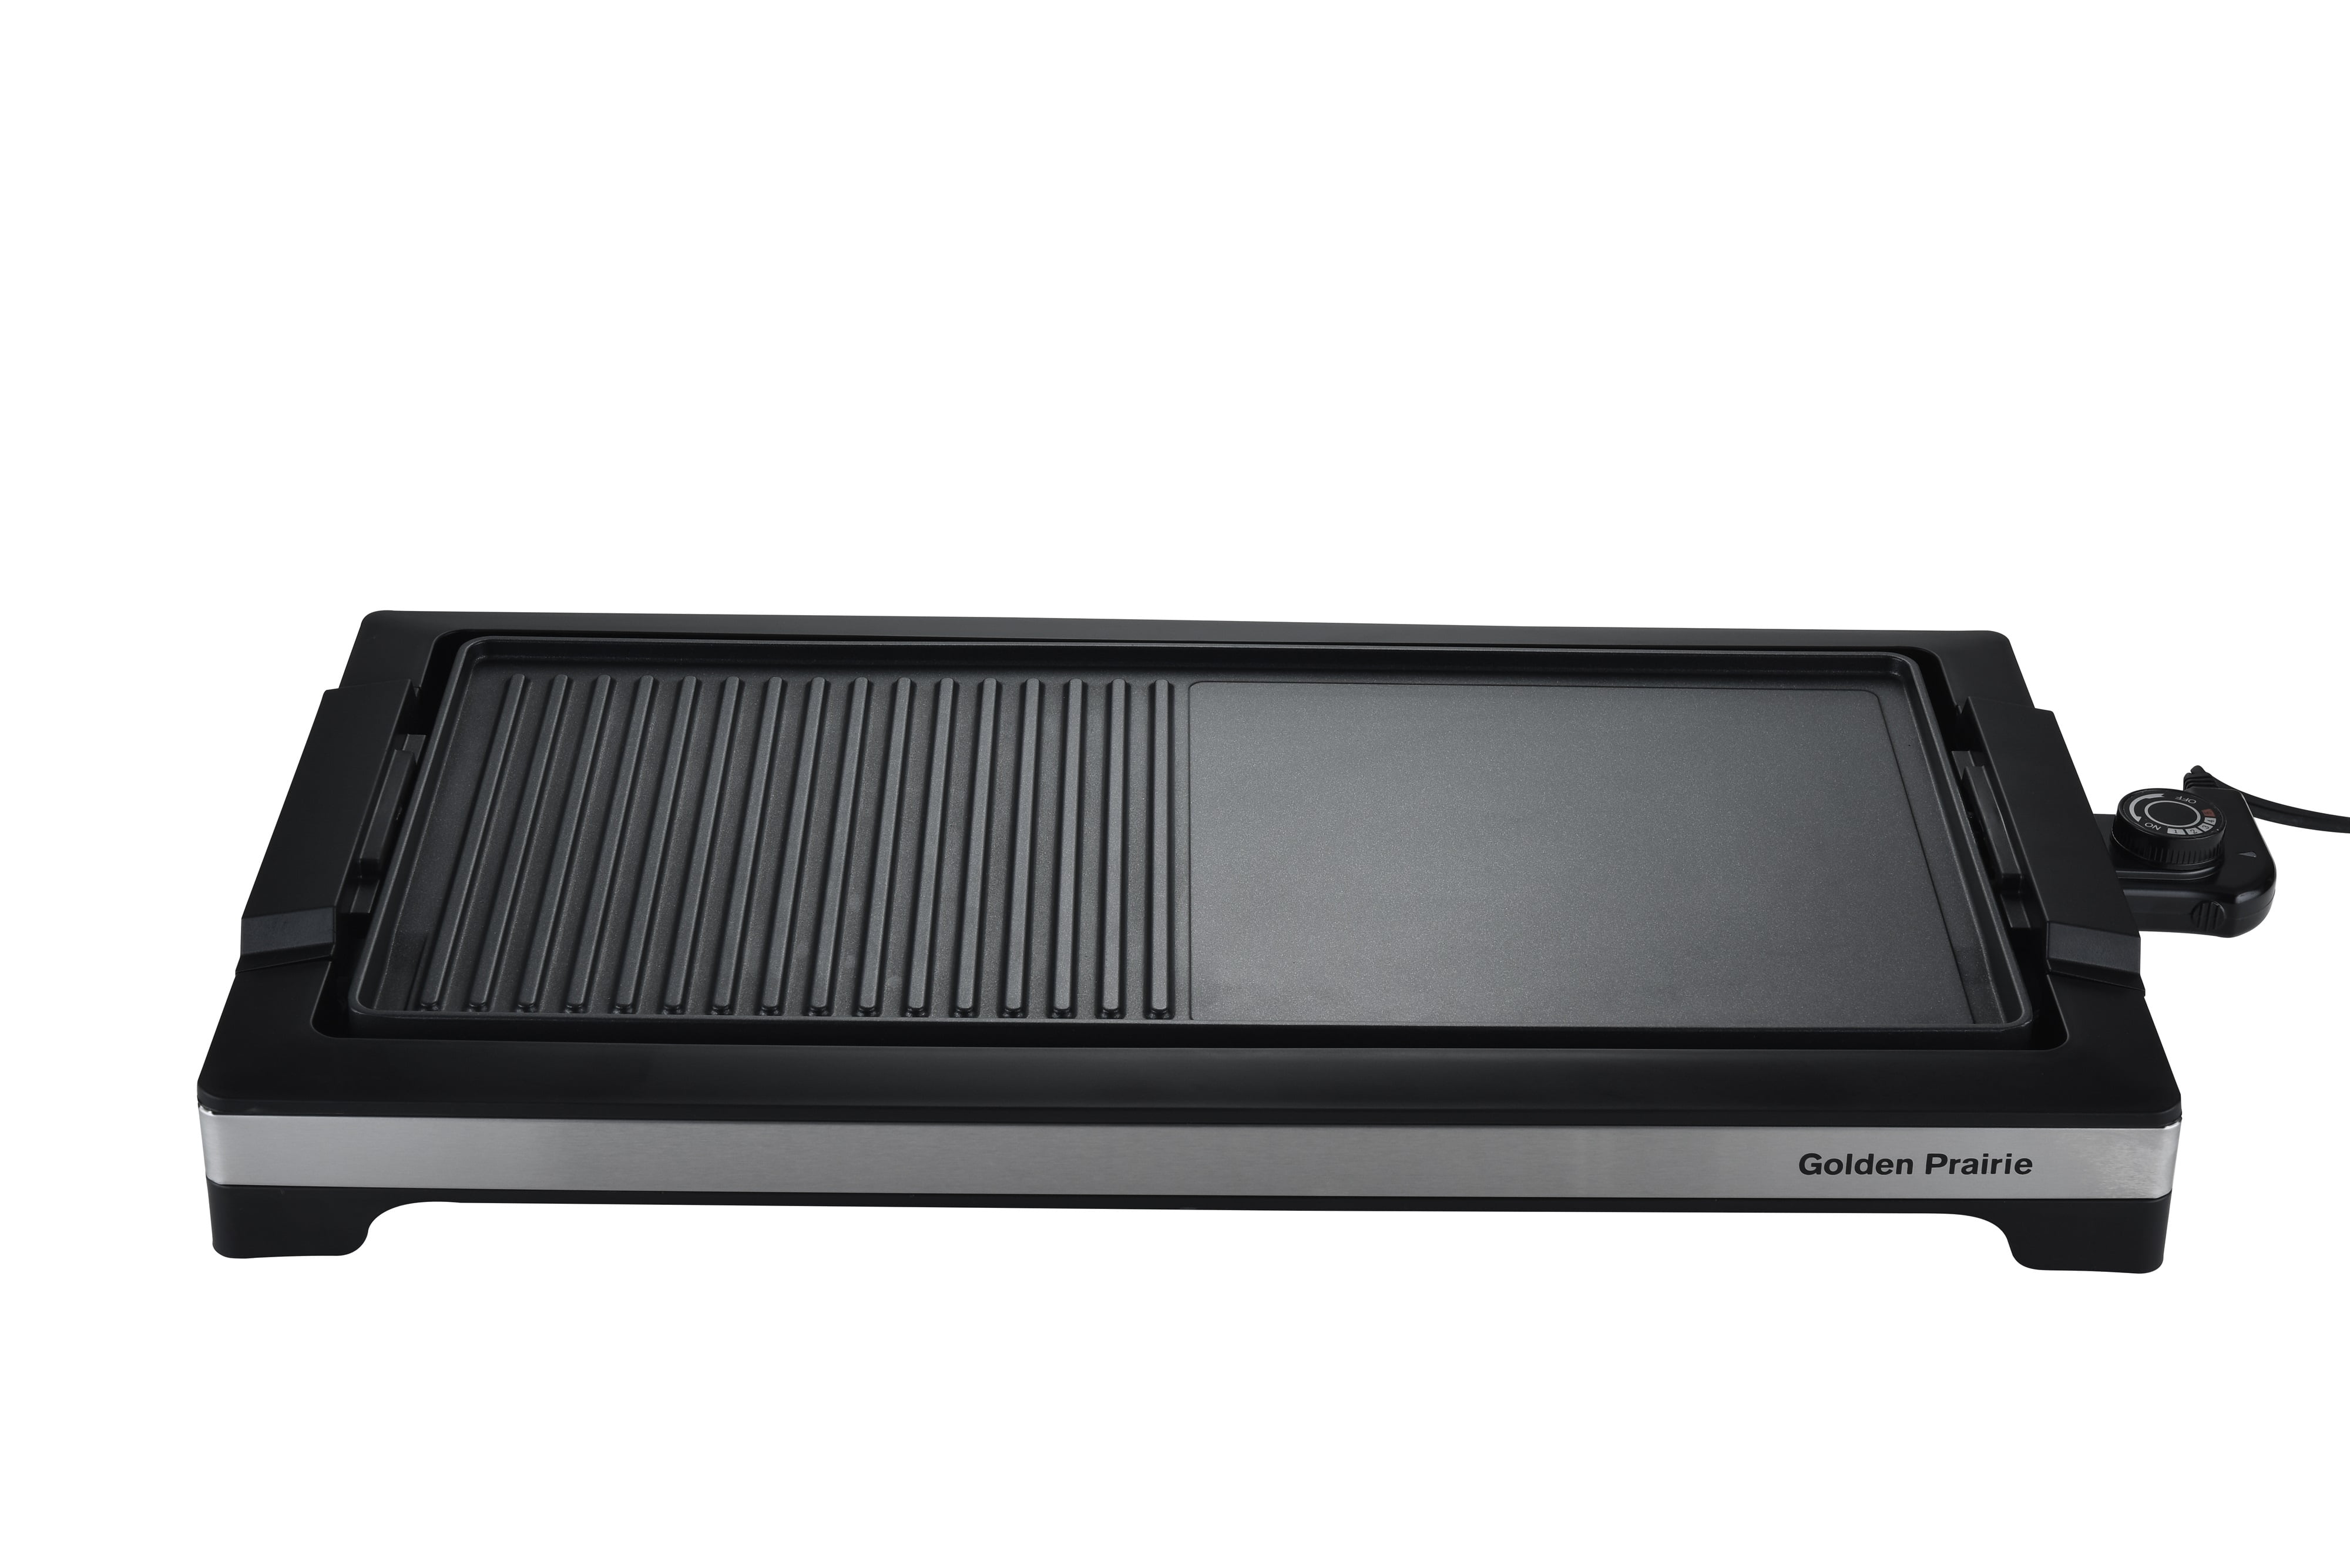 Secura Smokeless Indoor Grill 1800-Watt Electric Griddle with Reversible 2  in 1 Cast Iron Plate, Glass Lid, Extra Large Drip Tray (Dishwasher Safe) -  The Secura